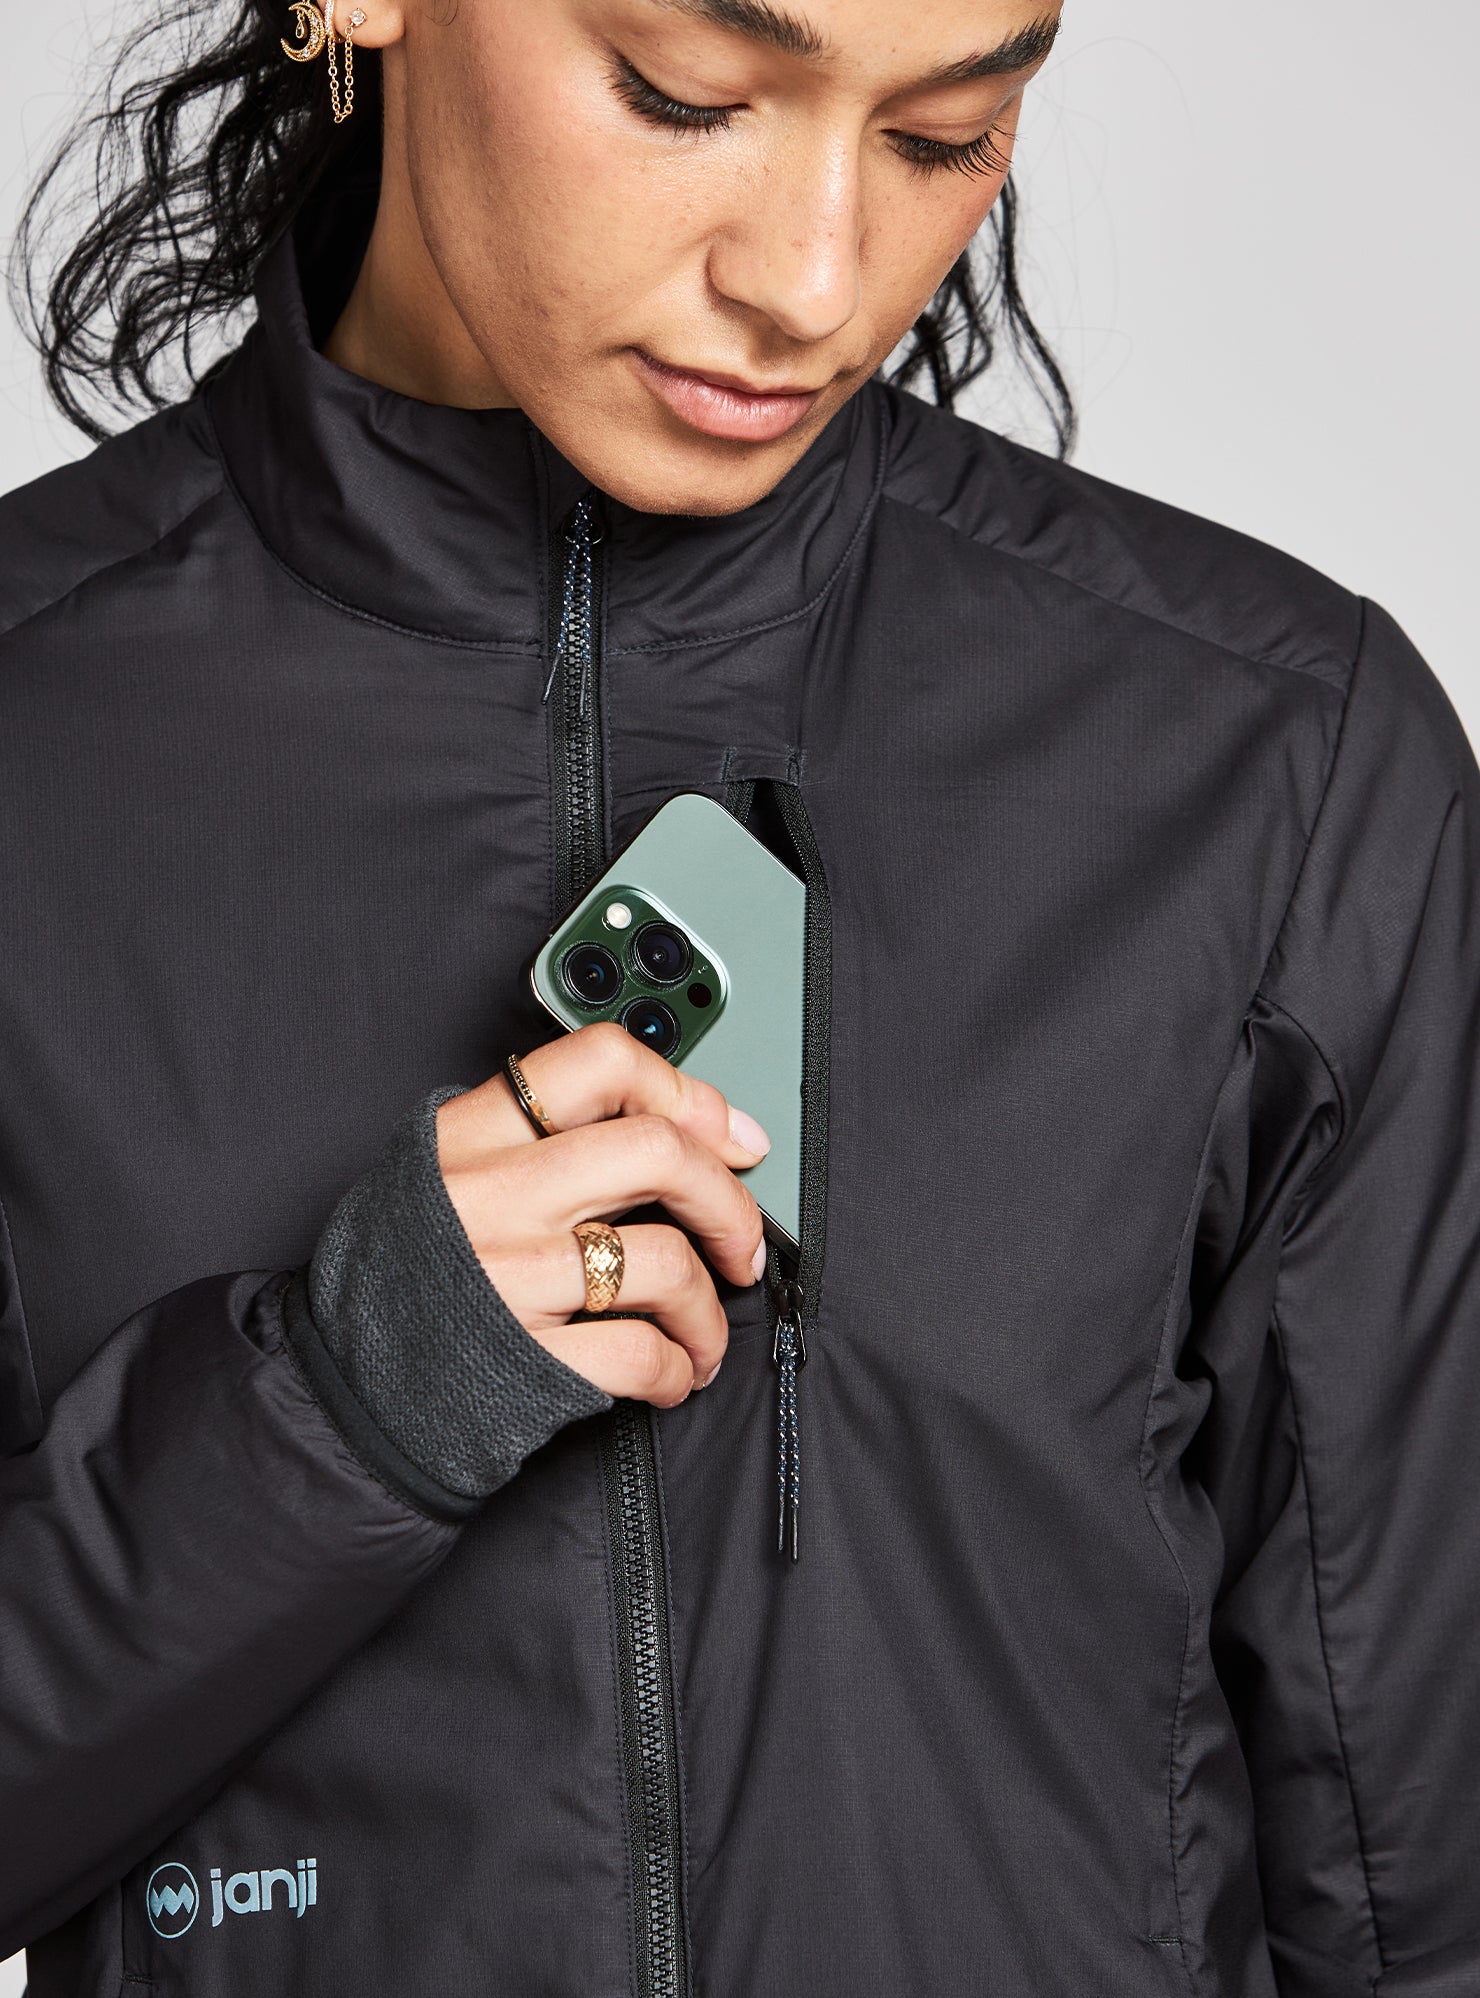 W's Thermalrunner Insulated Jacket